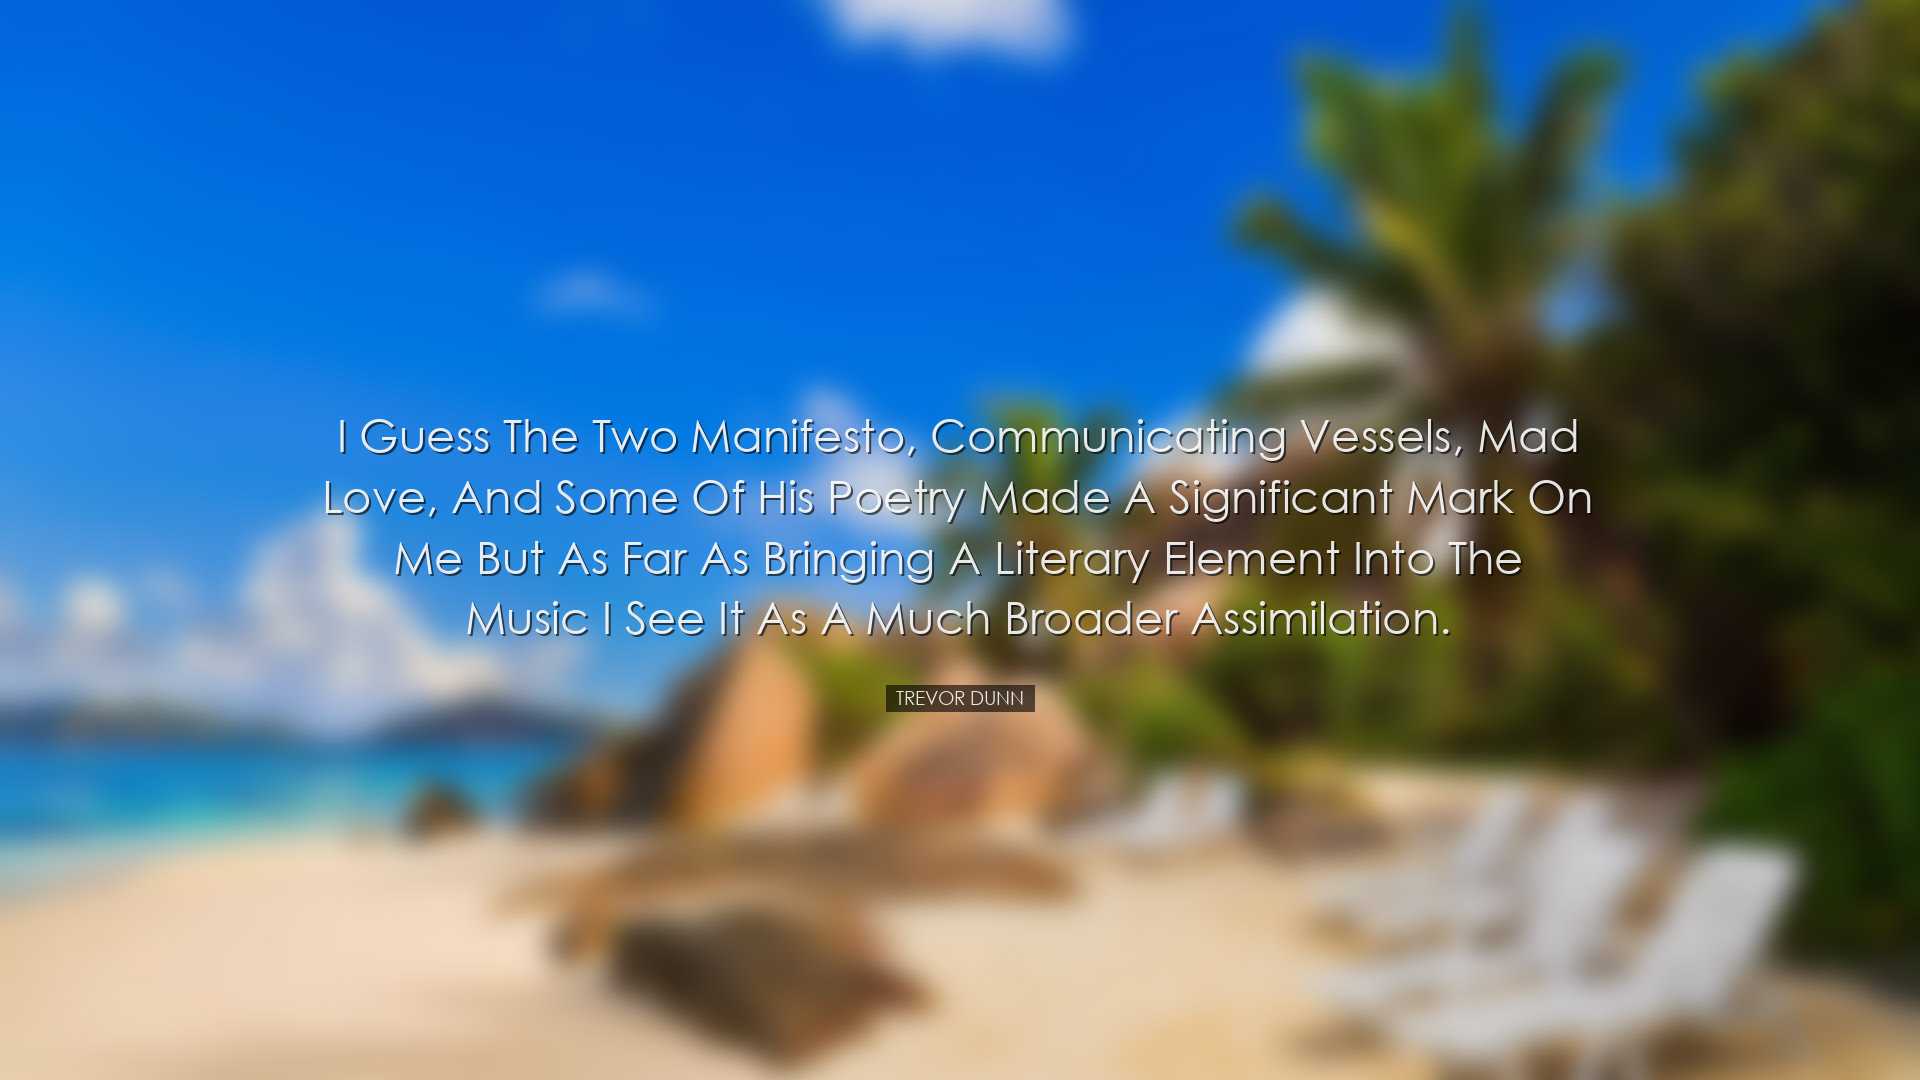 I guess the two Manifesto, Communicating Vessels, Mad Love, and so